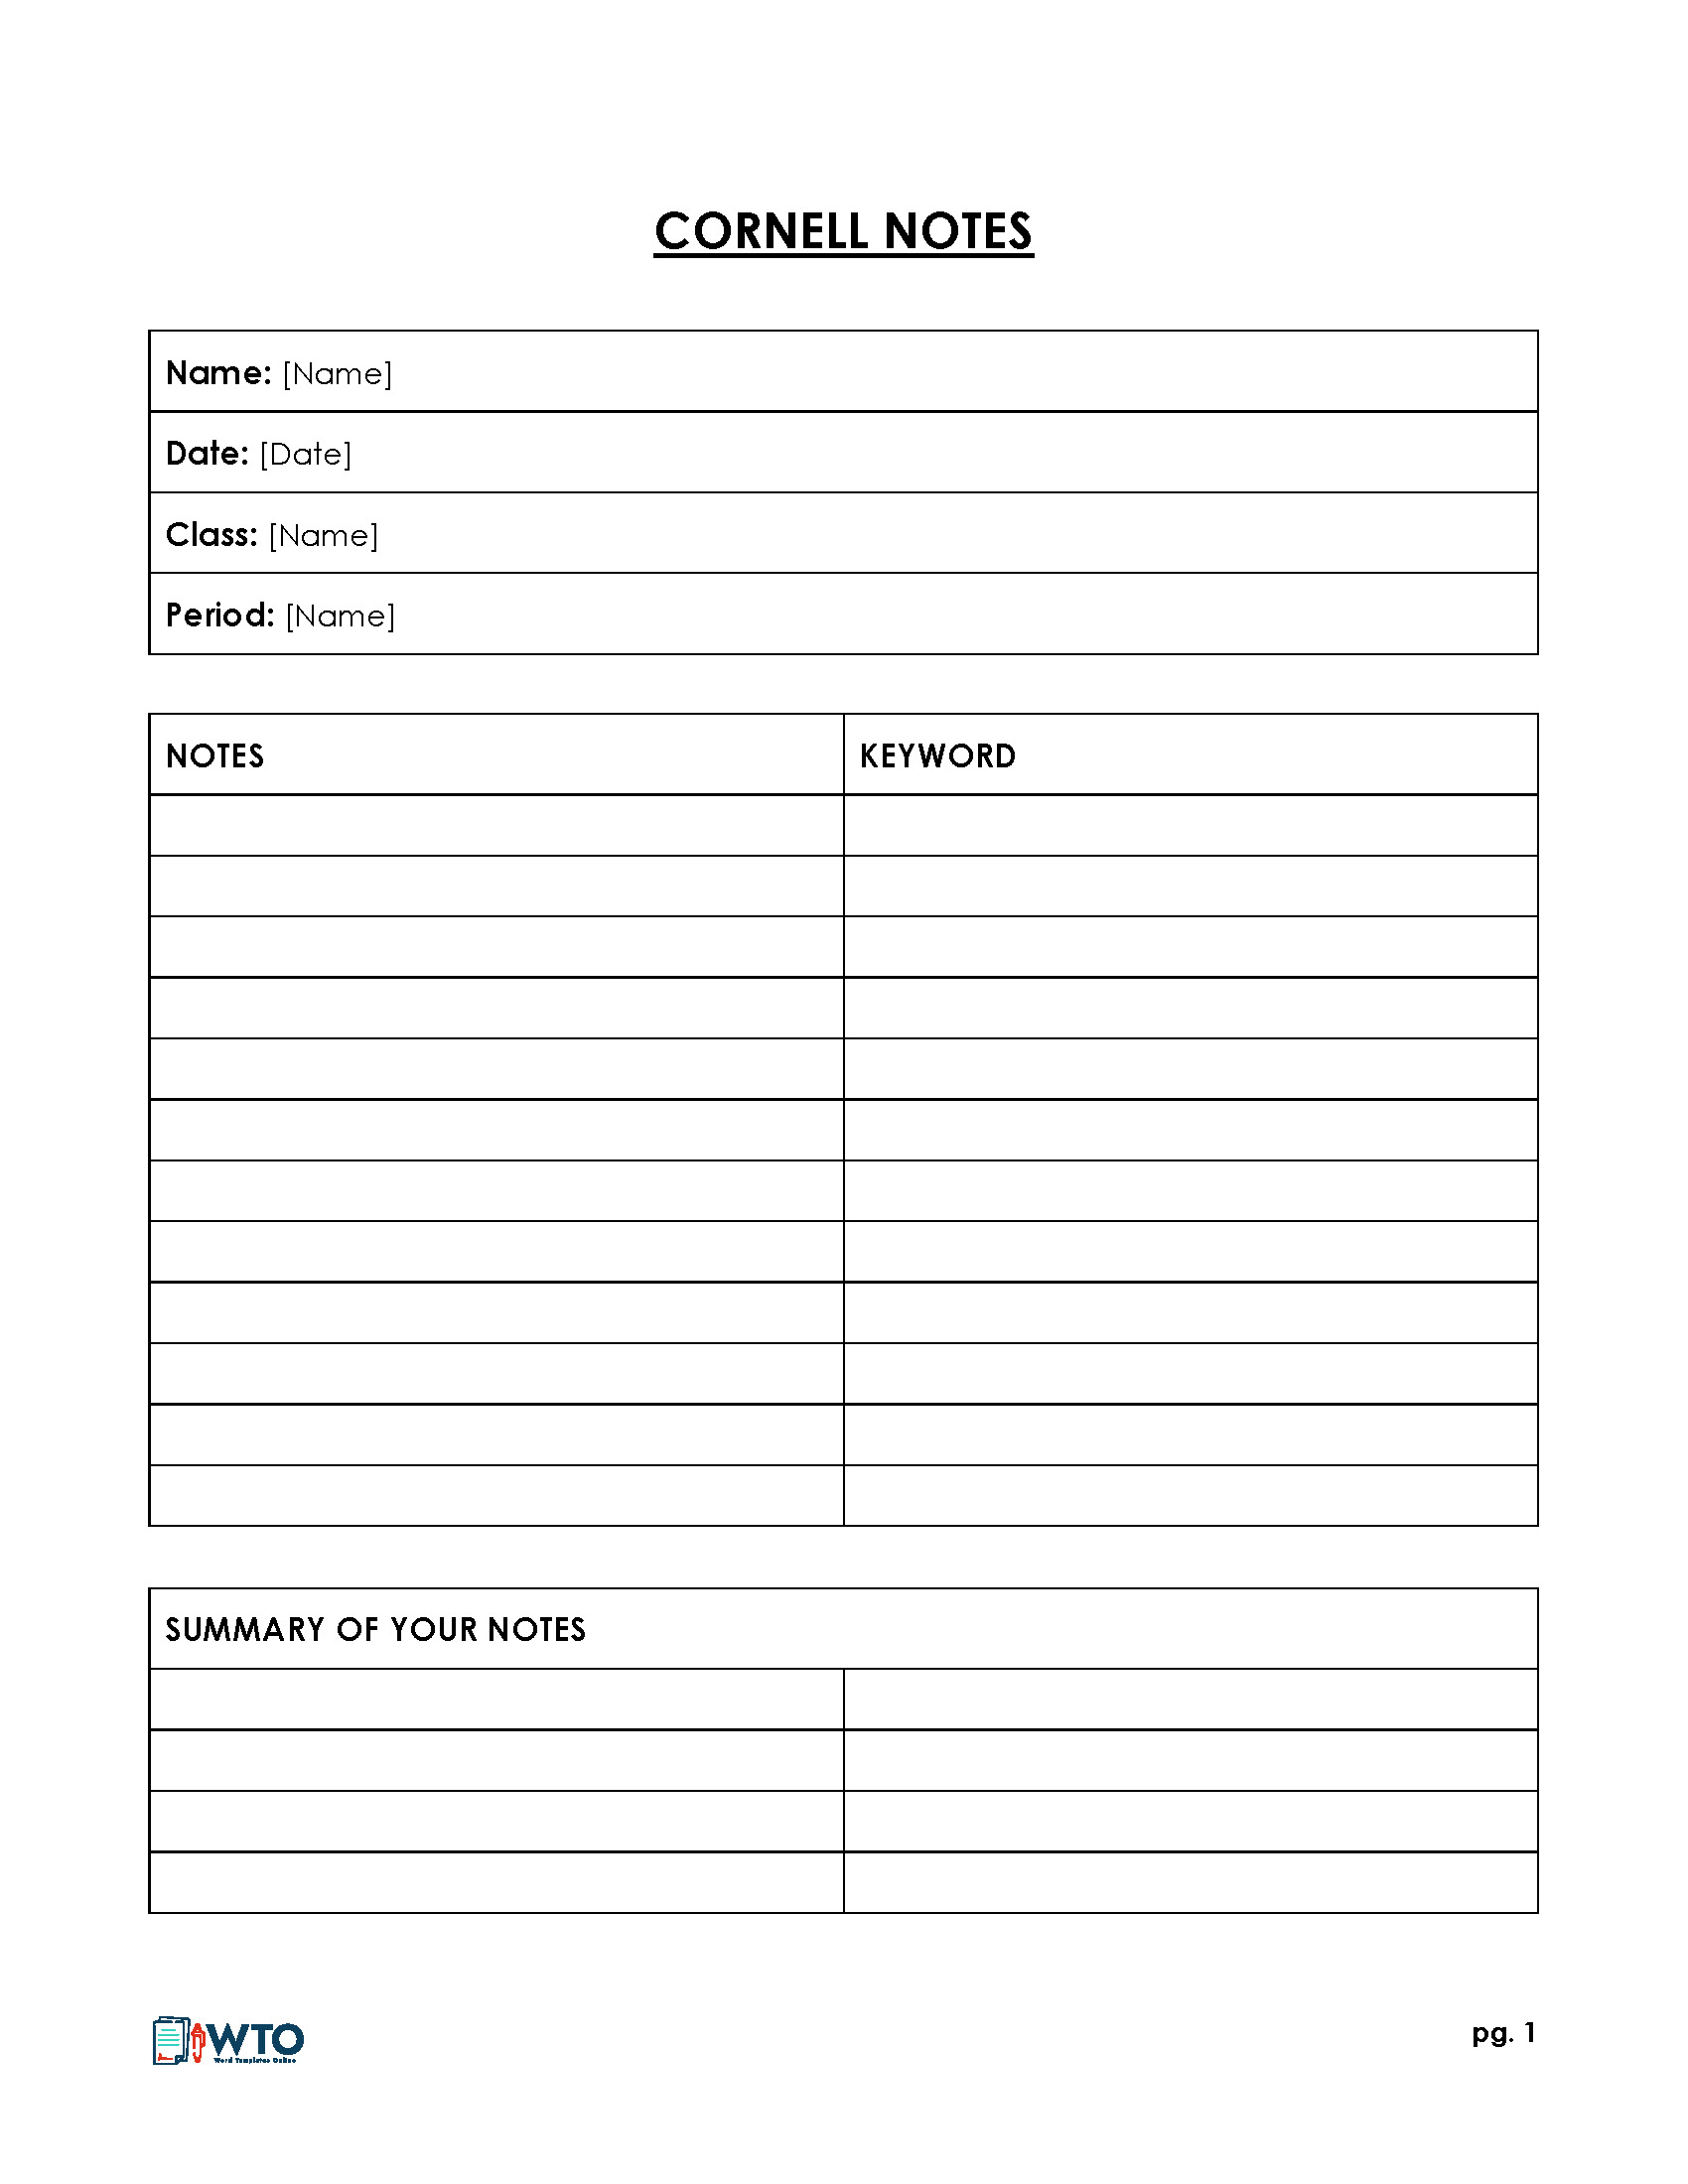 Excel Cornell Note Example Sample PDF